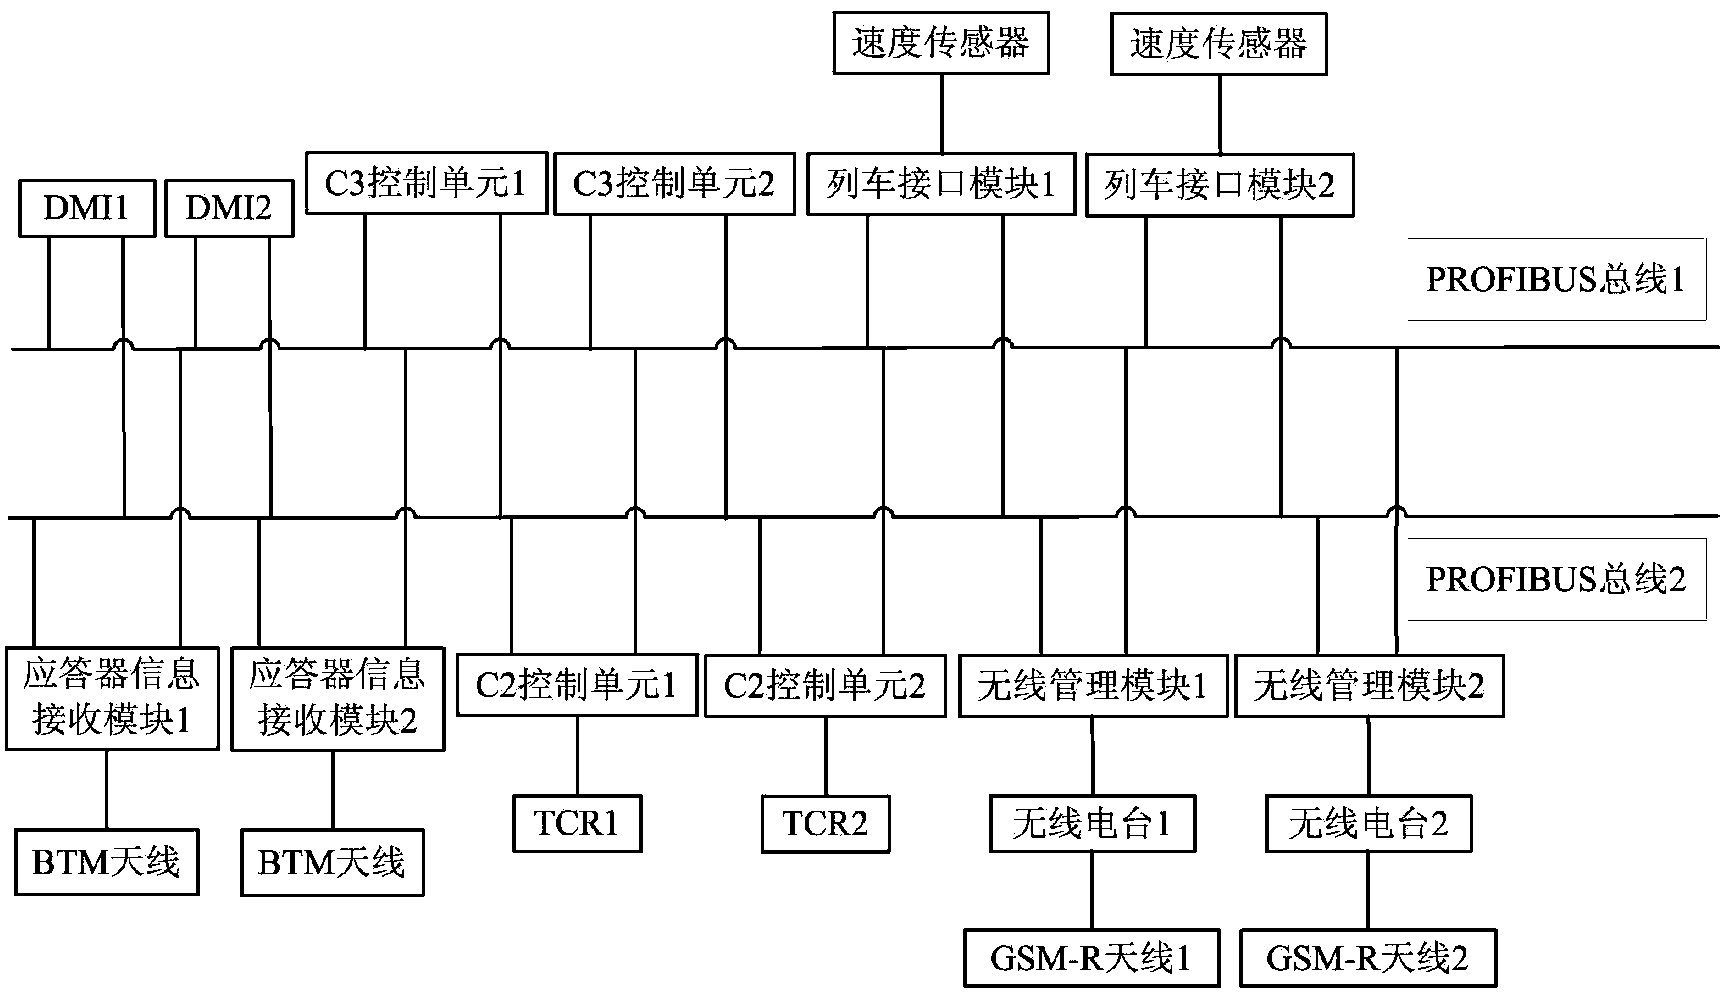 Method for estimating reliability of ATP (Automatic Train Protection) system of CTCS-3 (Chinese Train Control System of Level 3) based on dynamic fault tree